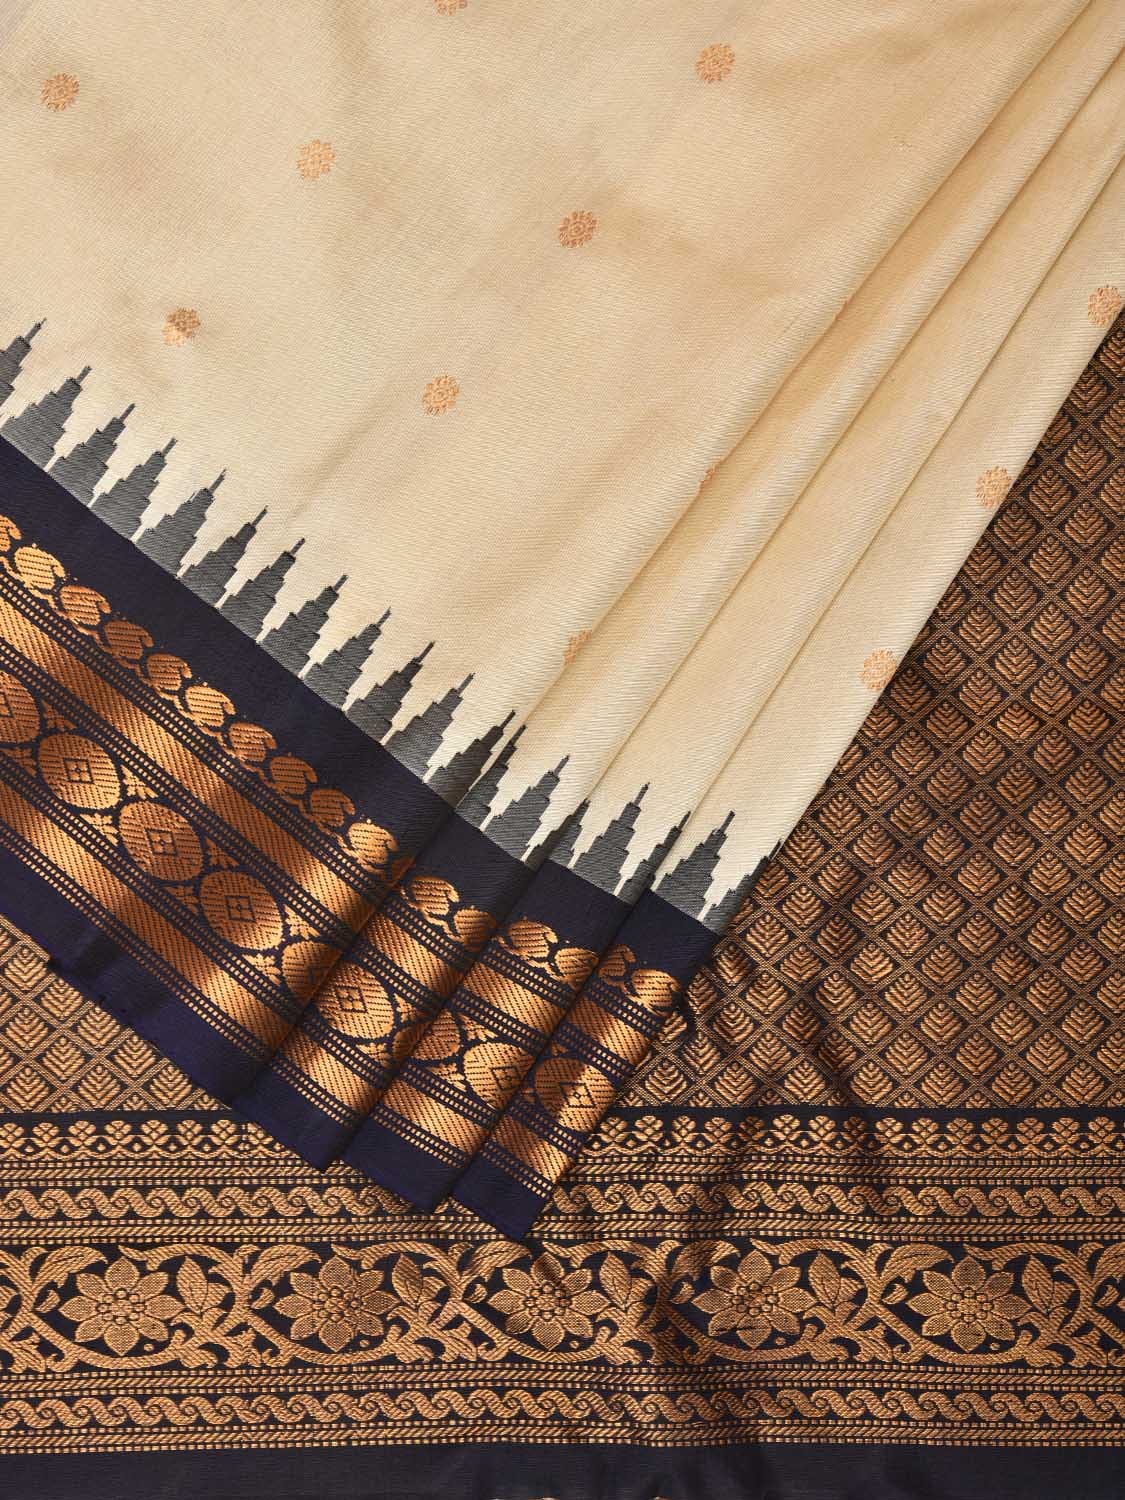 Buy YEOLA GADWAL COTTON PAITHANI SAREE I soft cotton I butta patern I  weaving border saree with unstiched blouse piece at Amazon.in